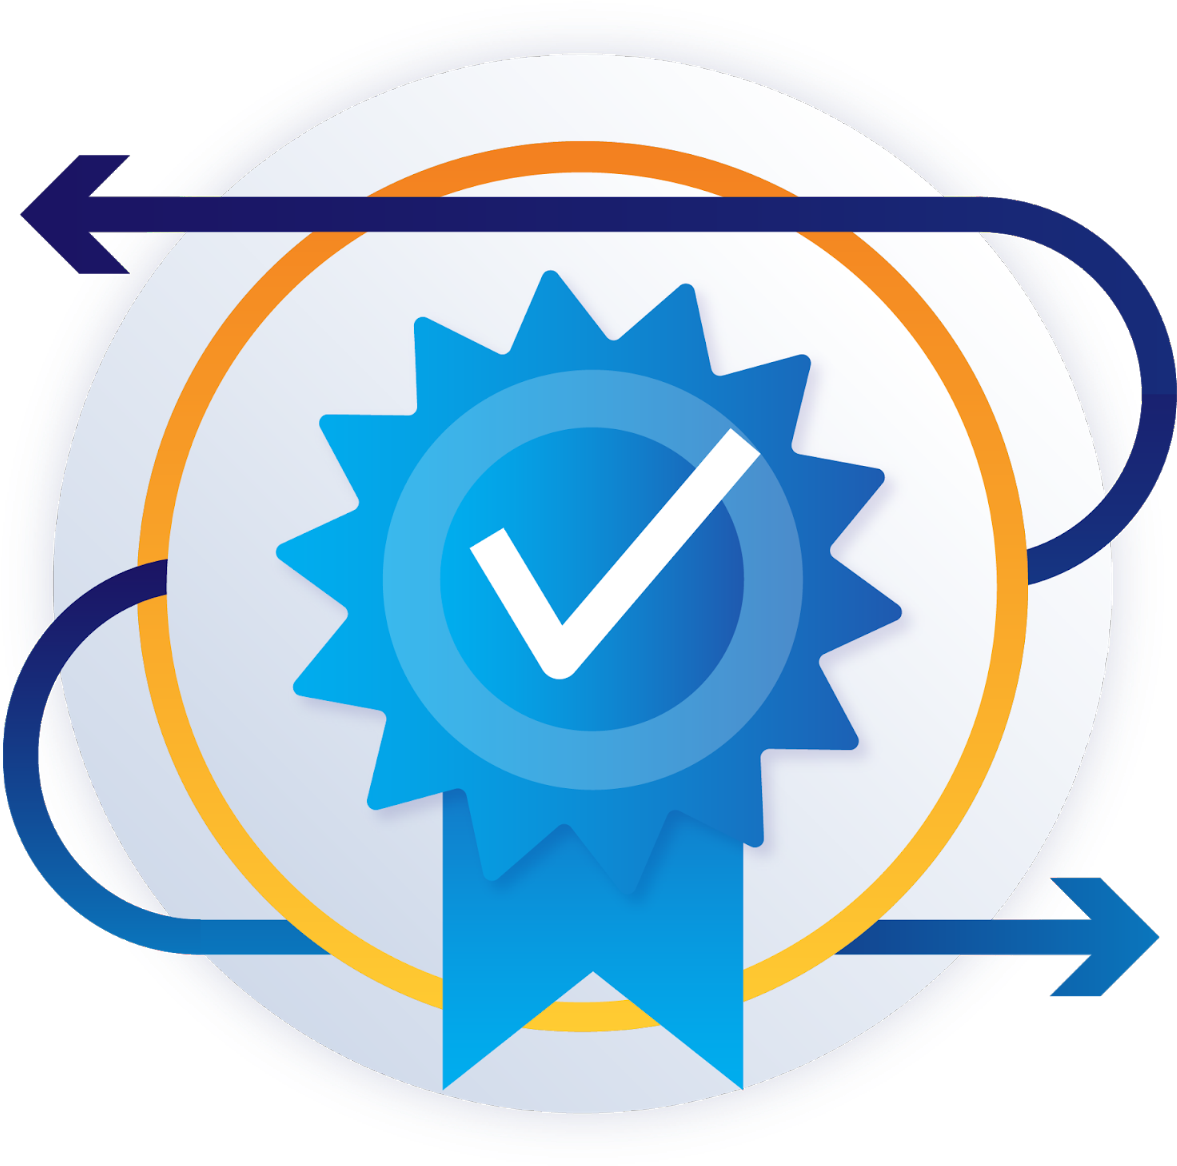 Certification Seal Graphic PNG image